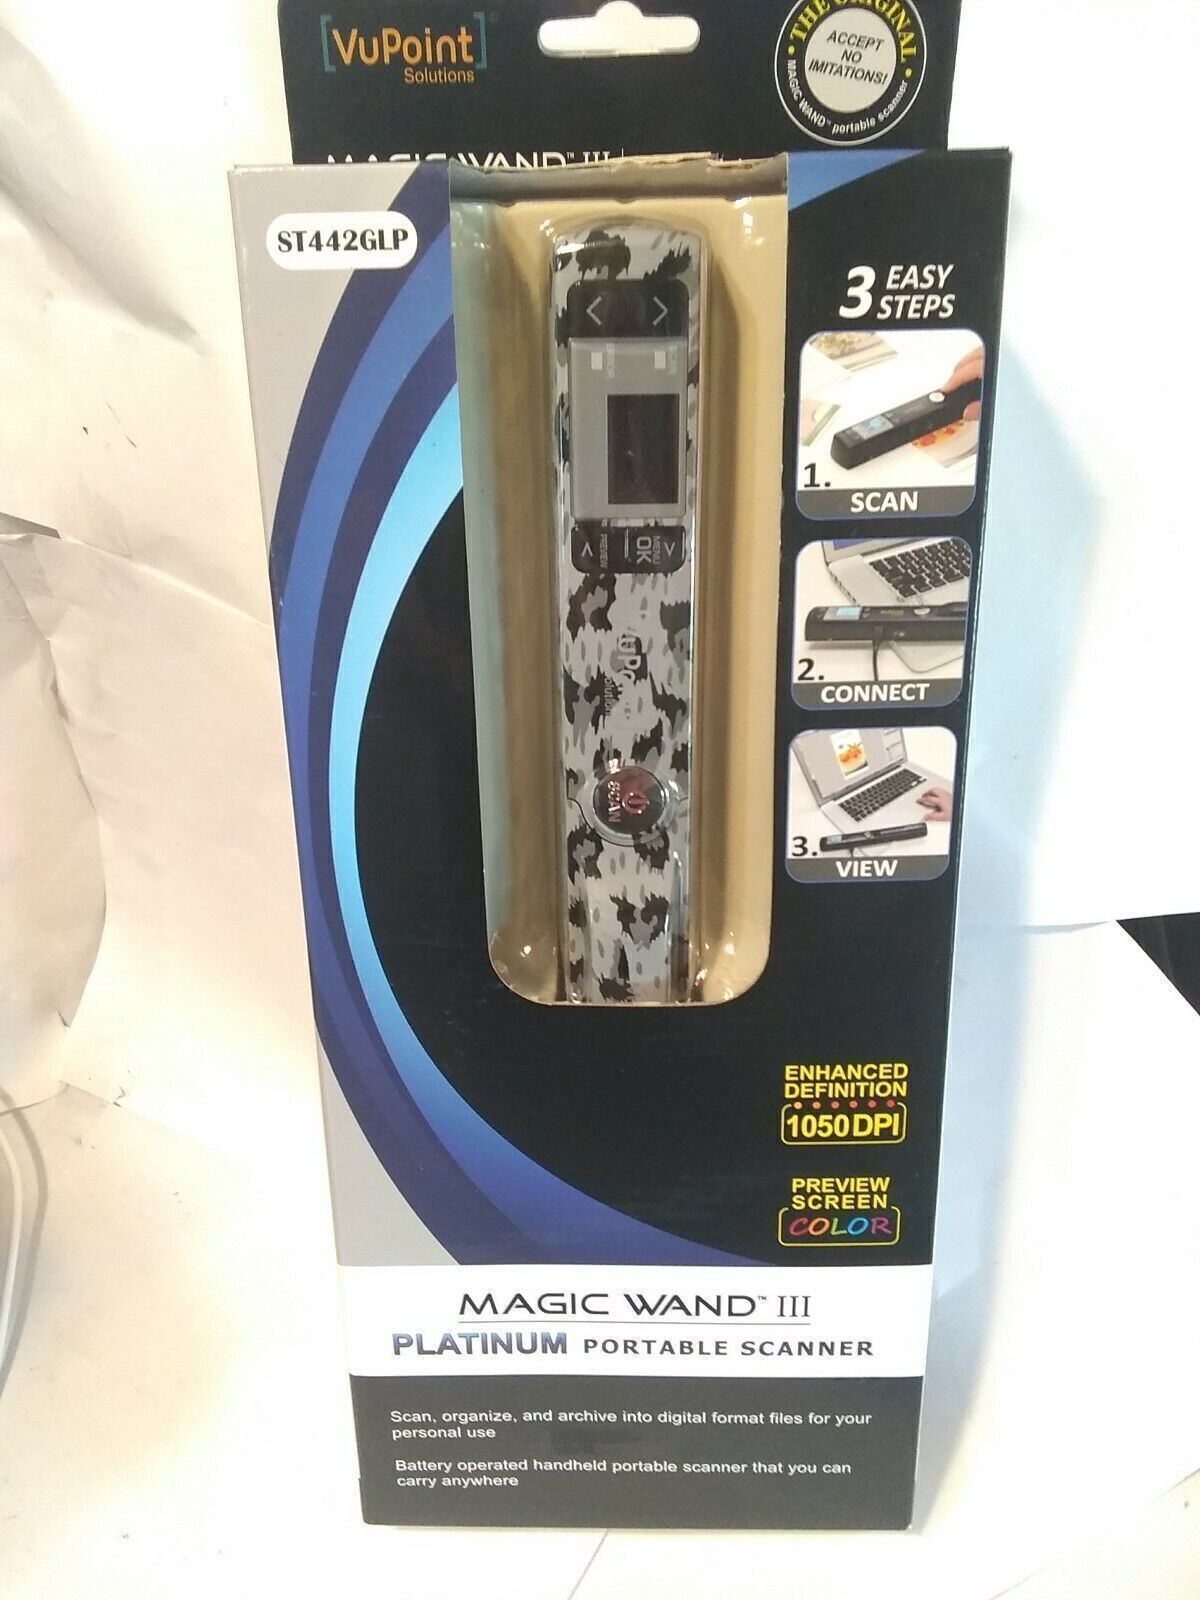 VuPoint Solutions MAGIC WAND III ST442BLP PORTABLE SCANNER Open Box but unused